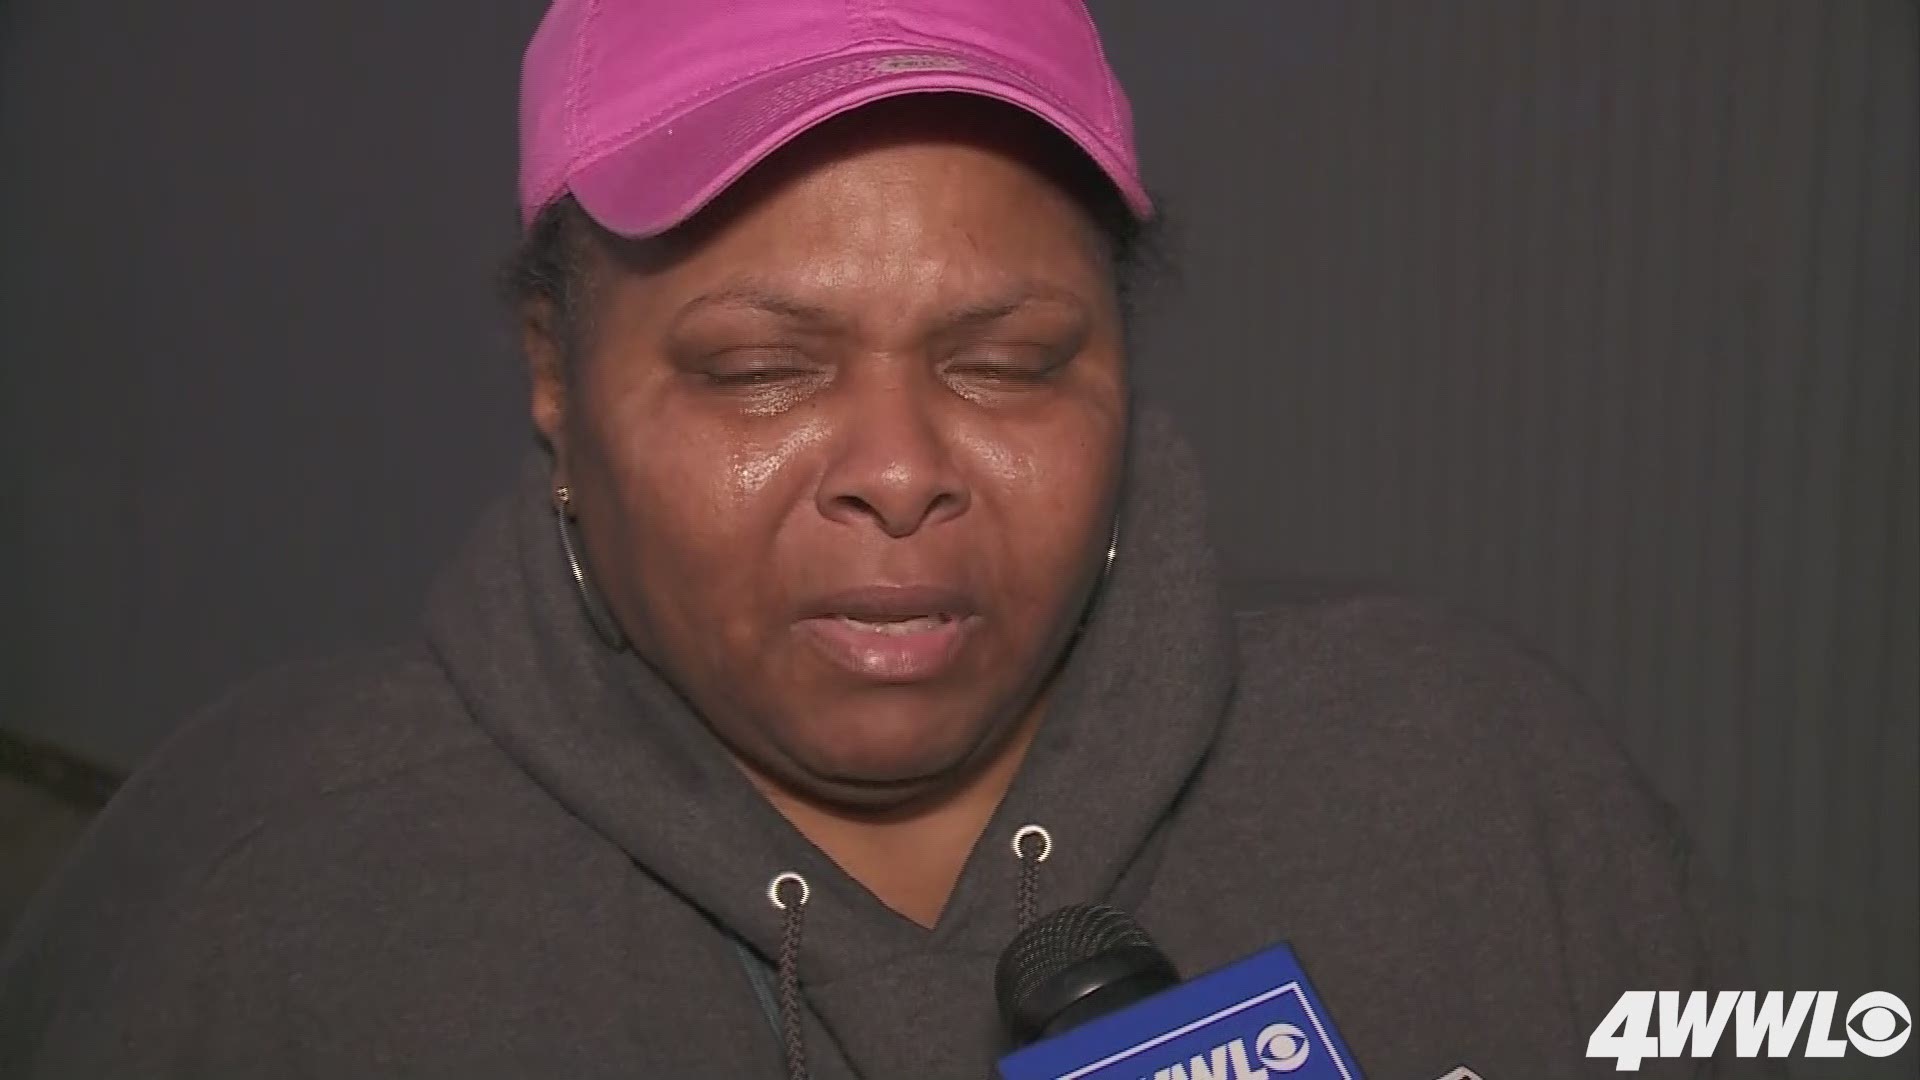 The great aunt of a man shot in the Lower Garden District on Tuesday said she has already lost two sons to gun violence.